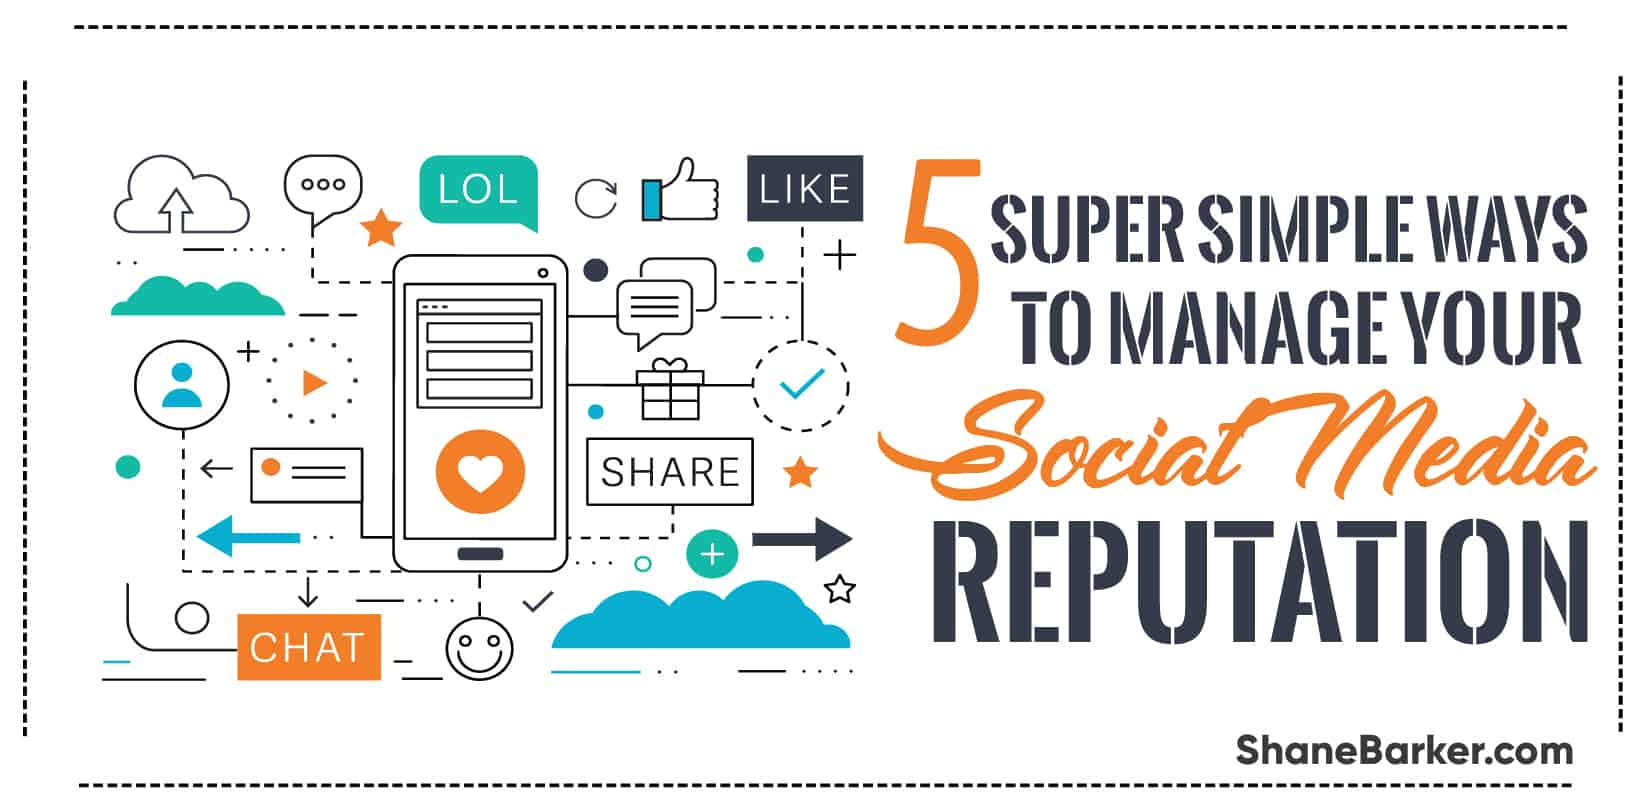 5 super simple ways to manage your social media reputation